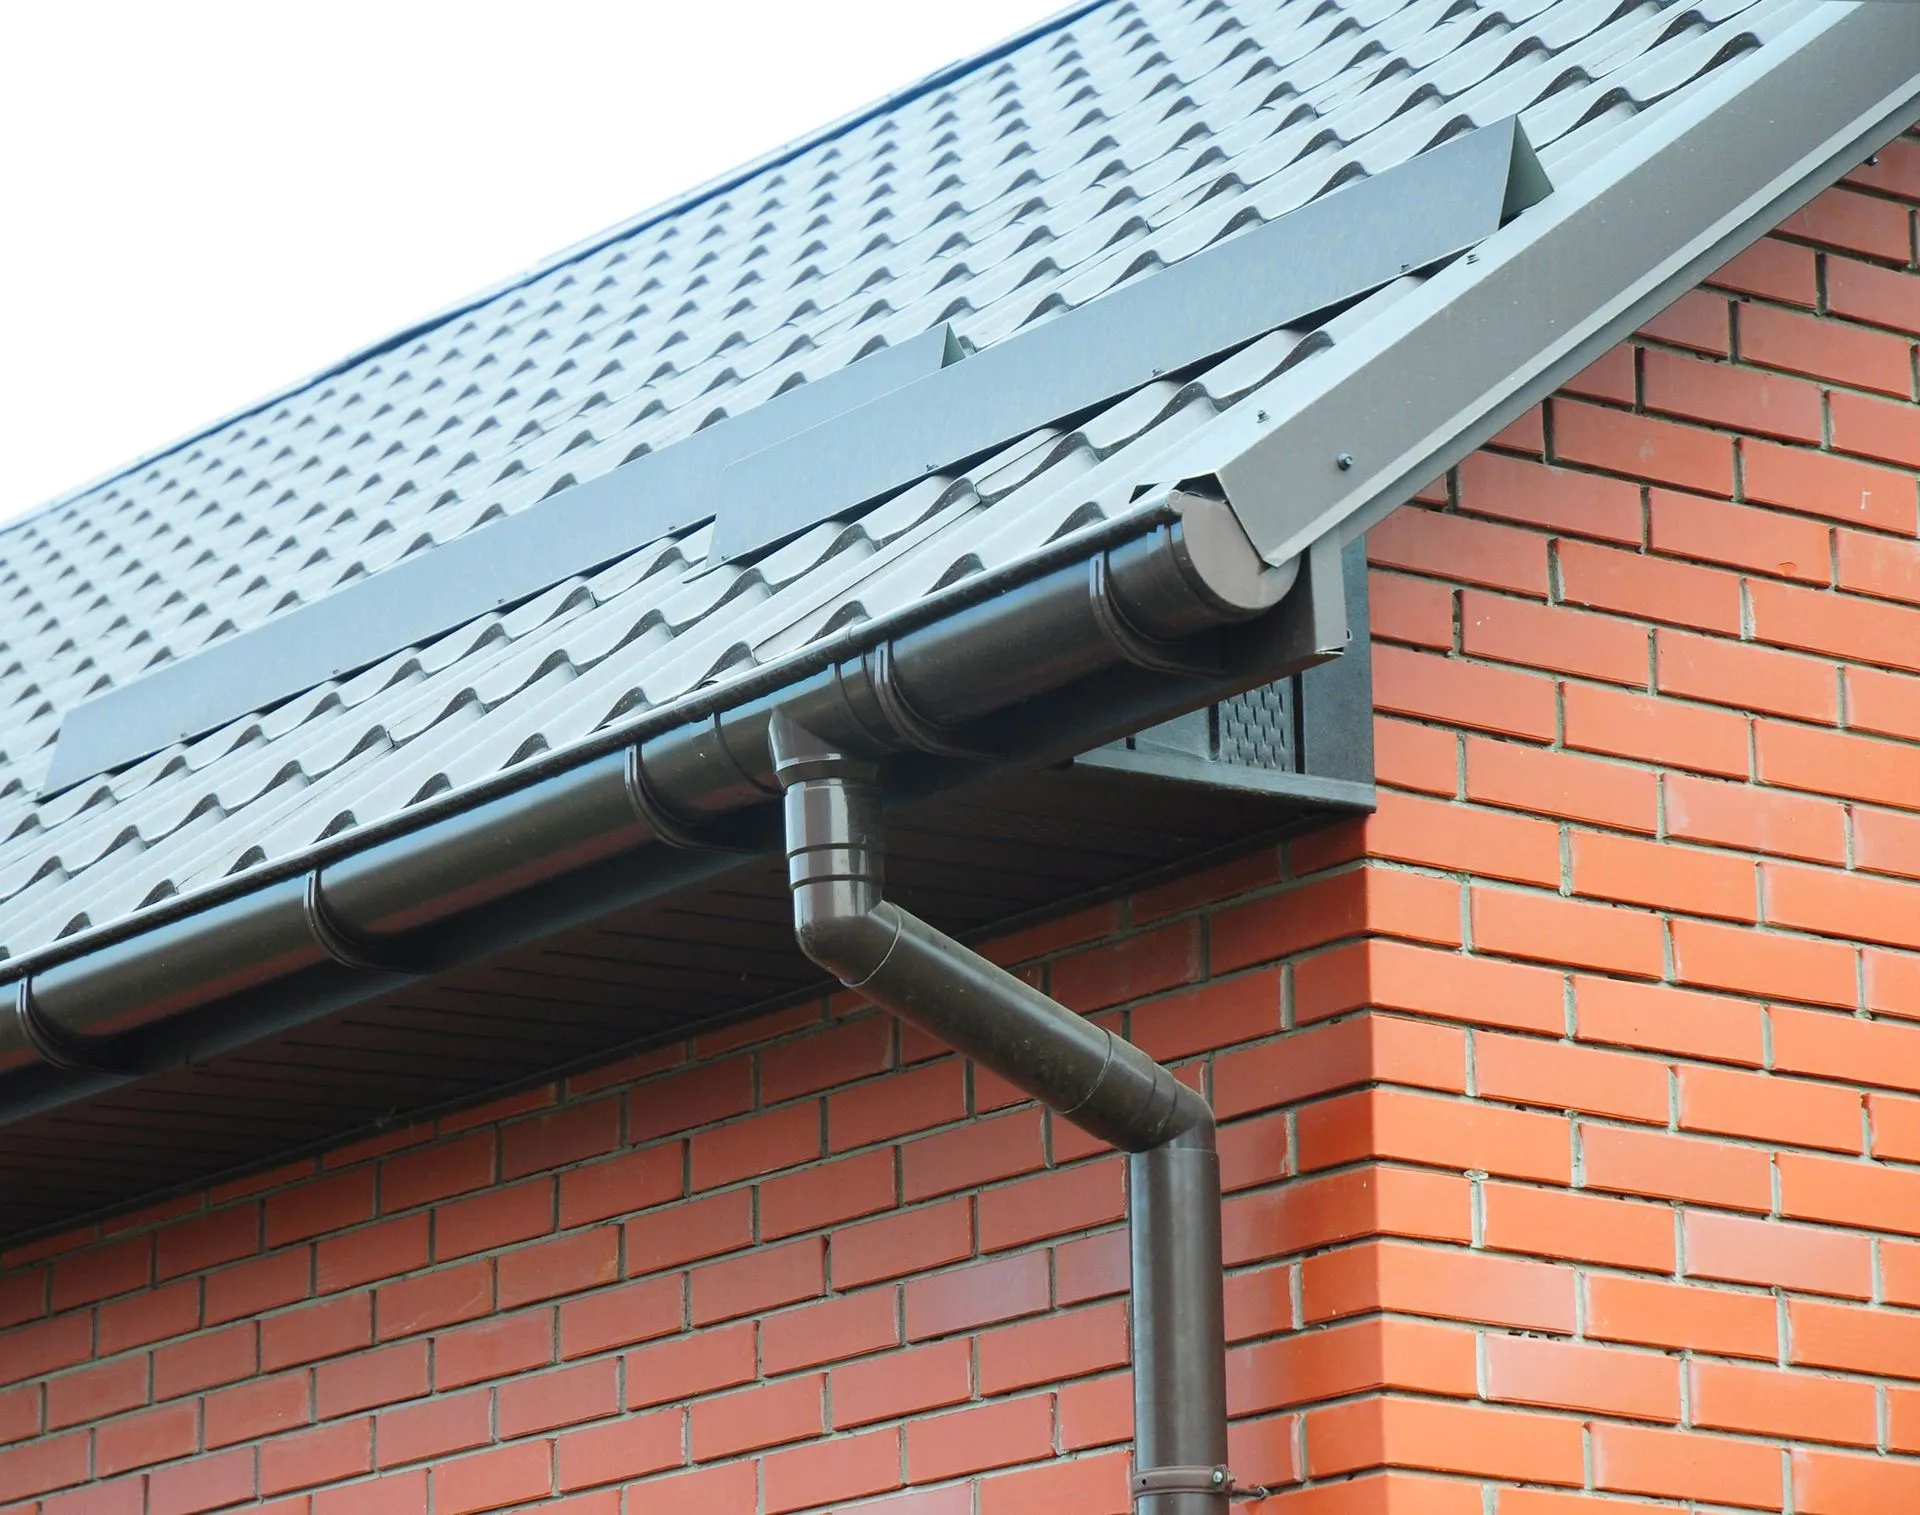 Top 3 Questions Our Customers Ask About Metal Roofing